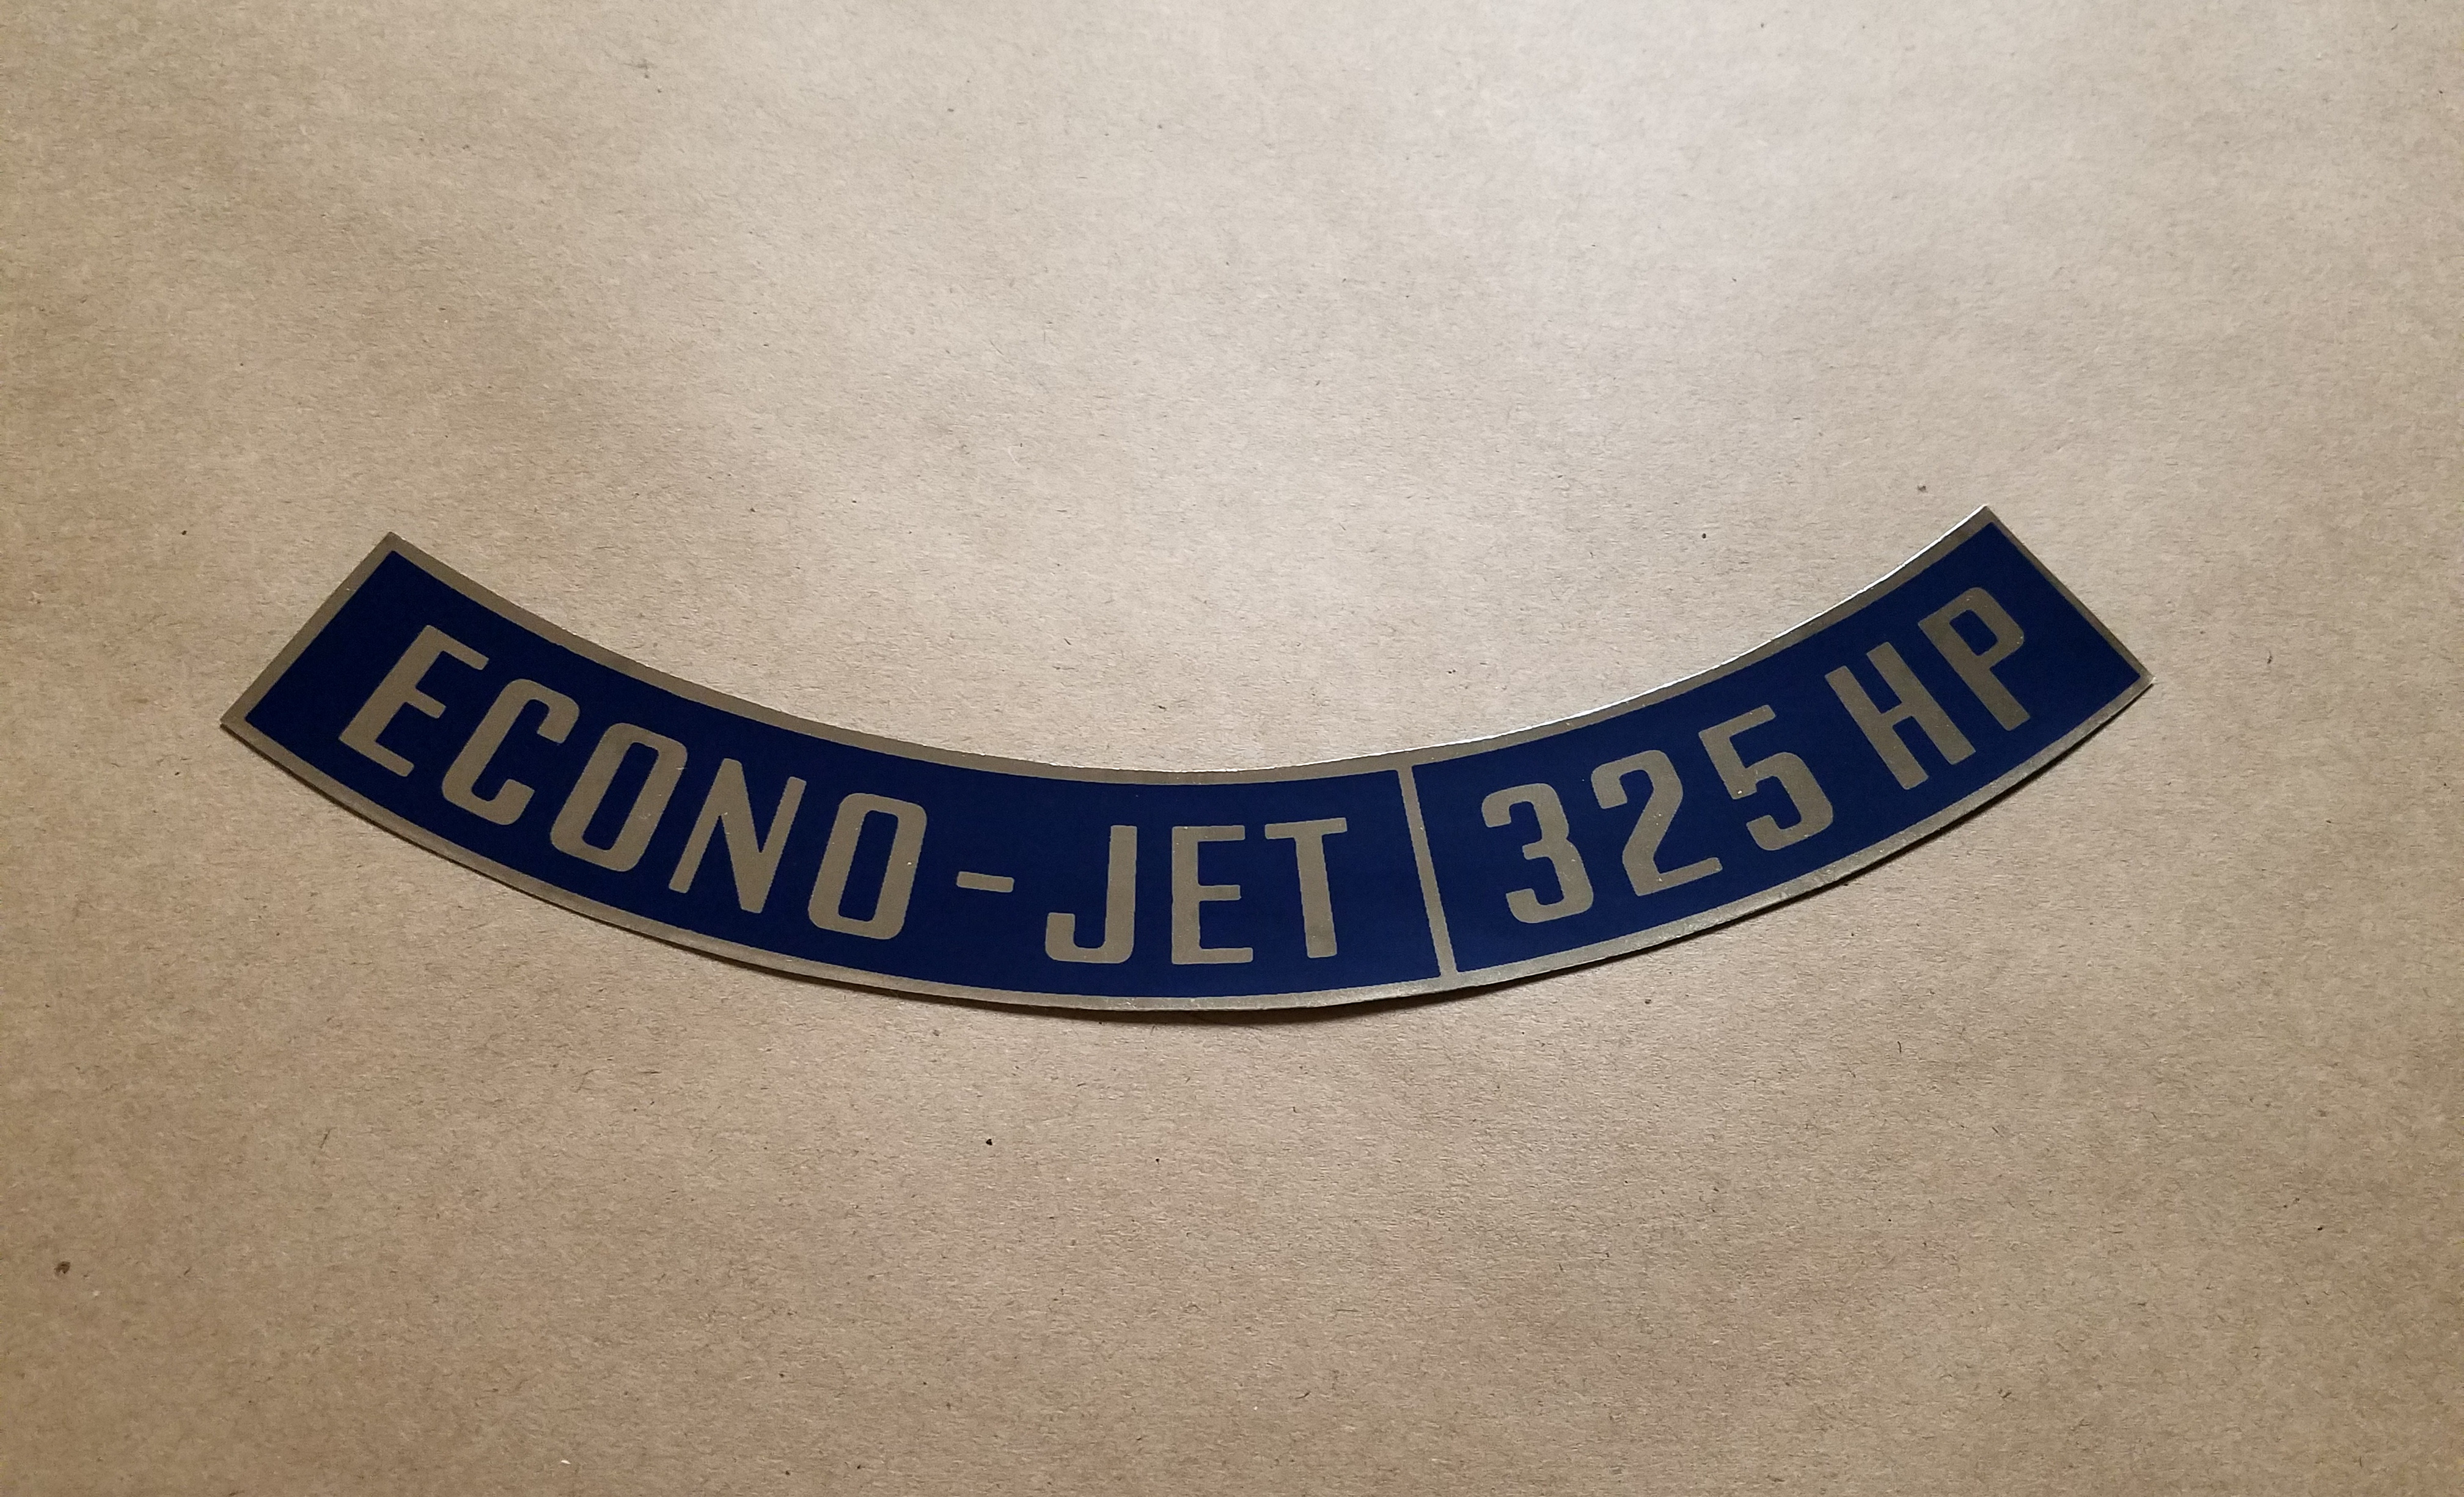 Decal Econo Jet 325 HP Air Cleaner